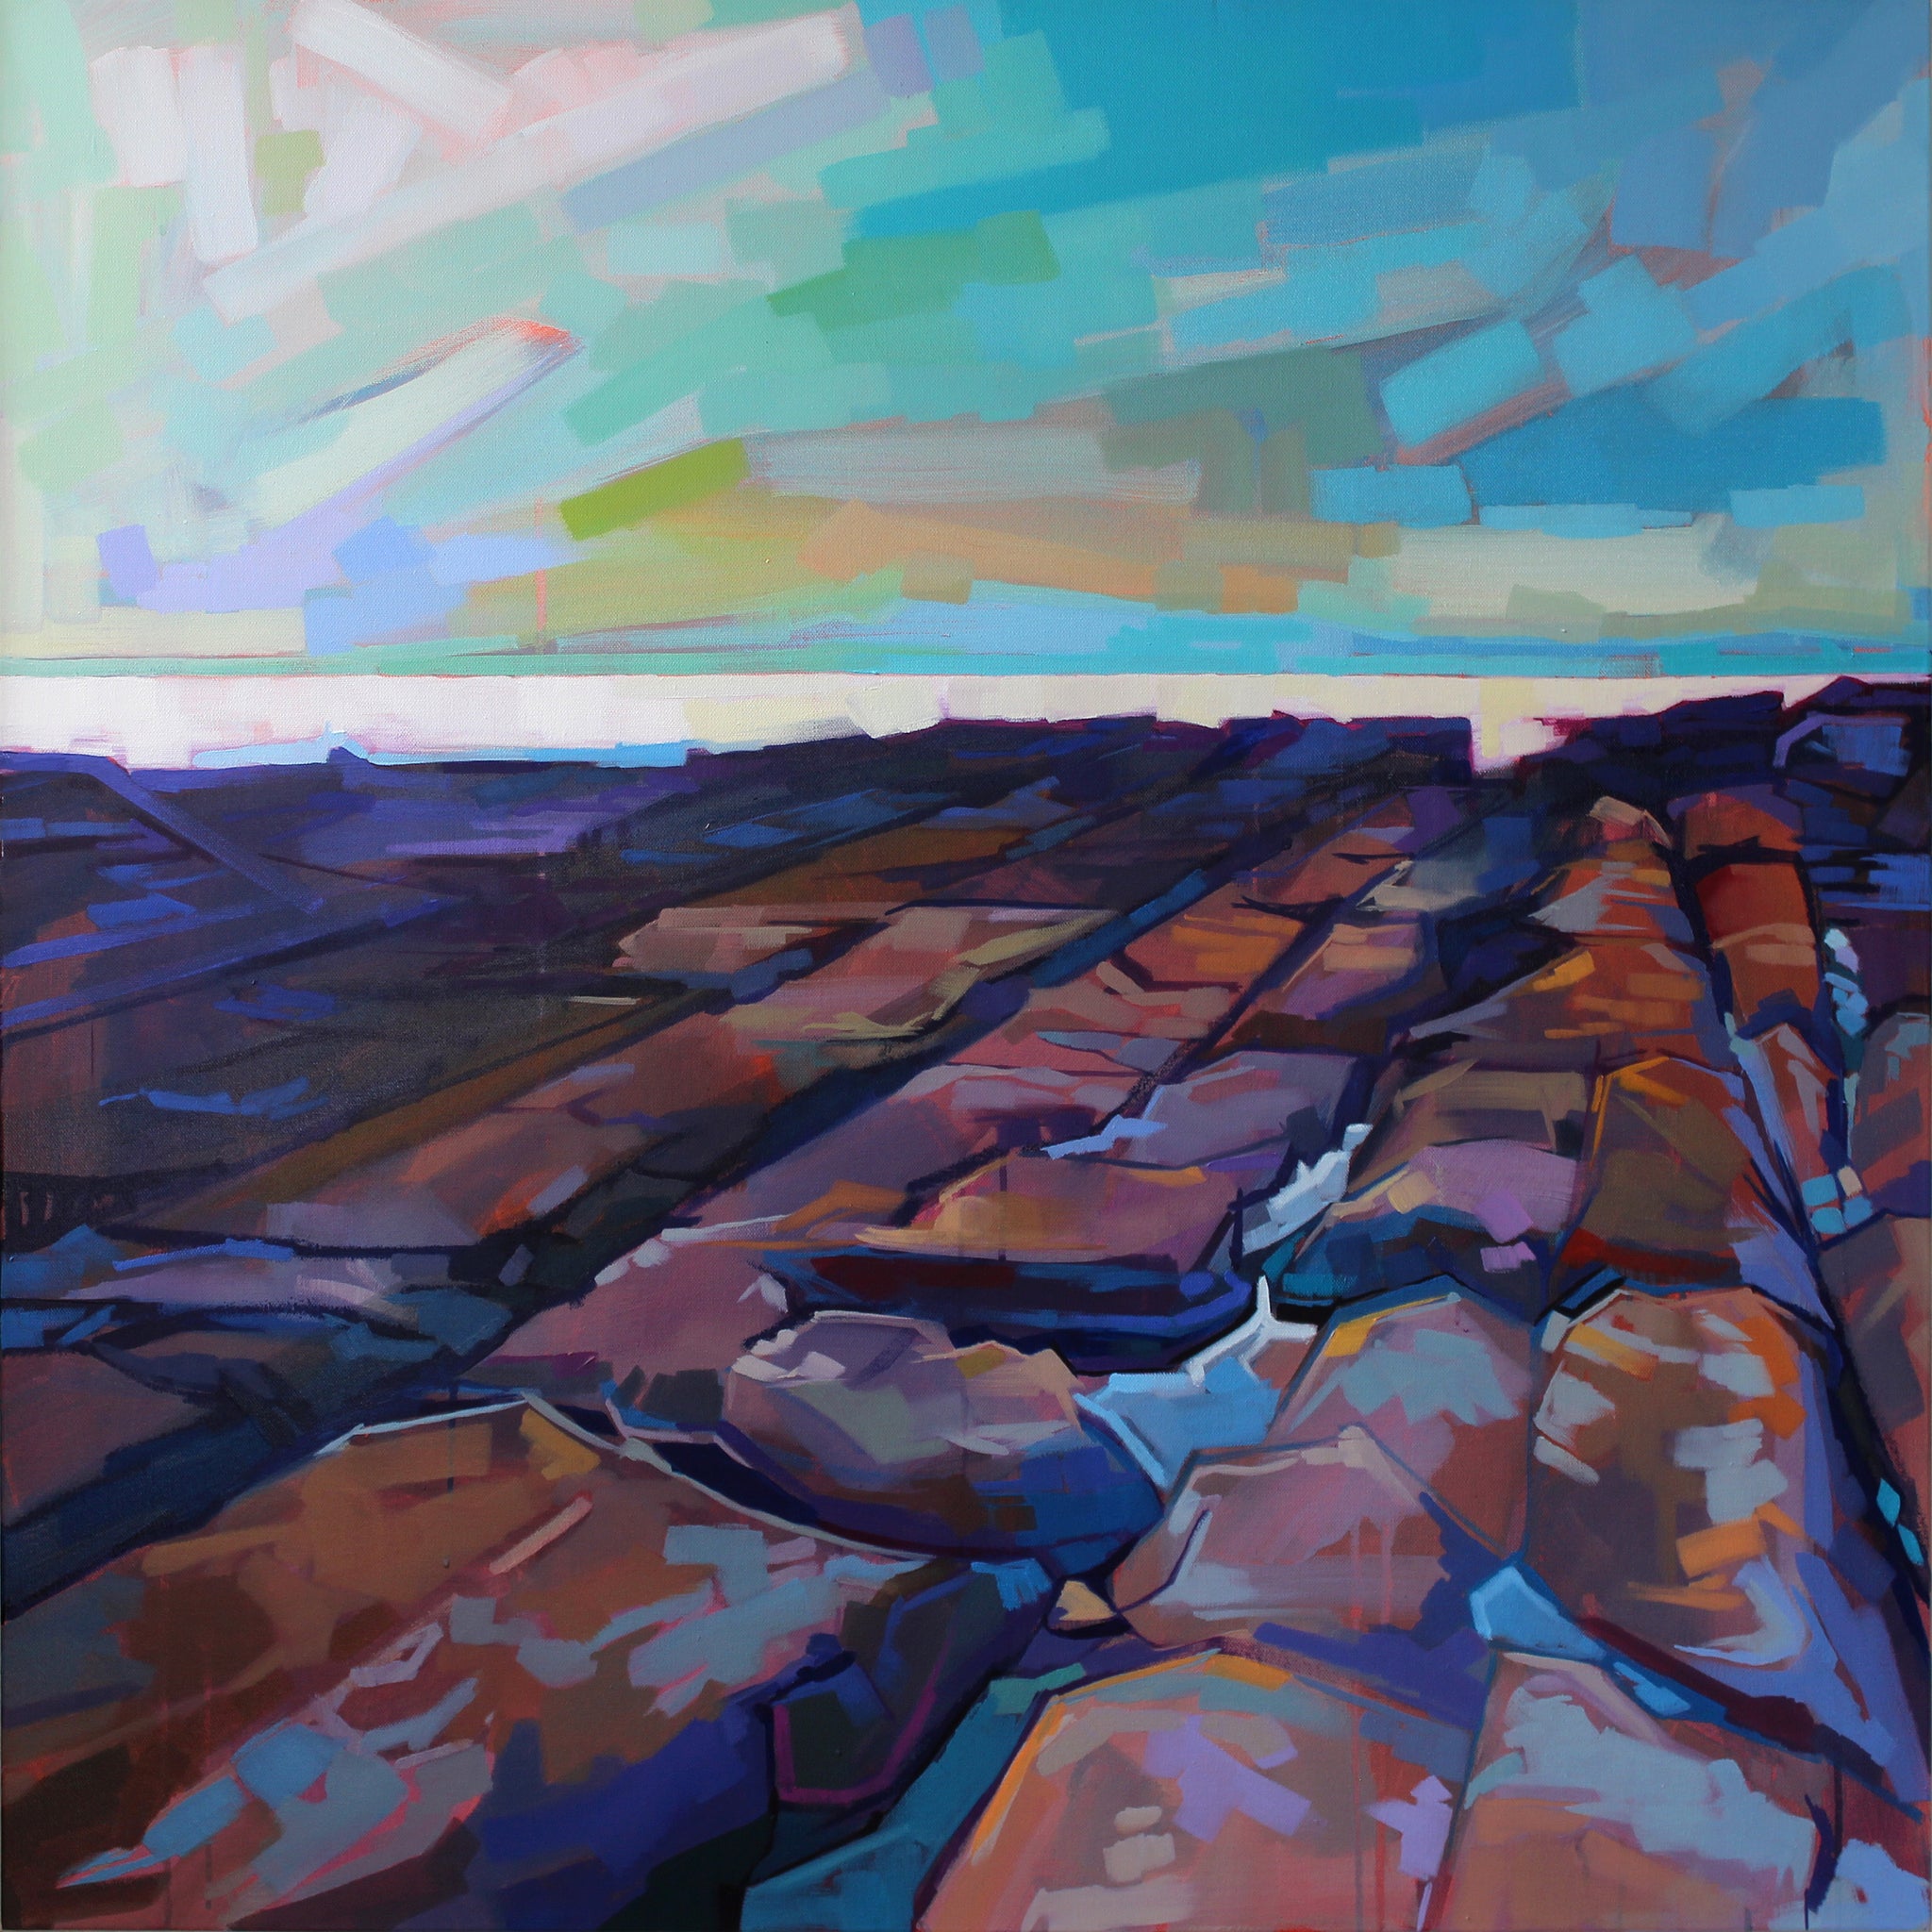 Rocks At Pampa - Contemporary art from Ireland. Paintings & prints by Irish seascape & landscape artist Kevin Lowery.